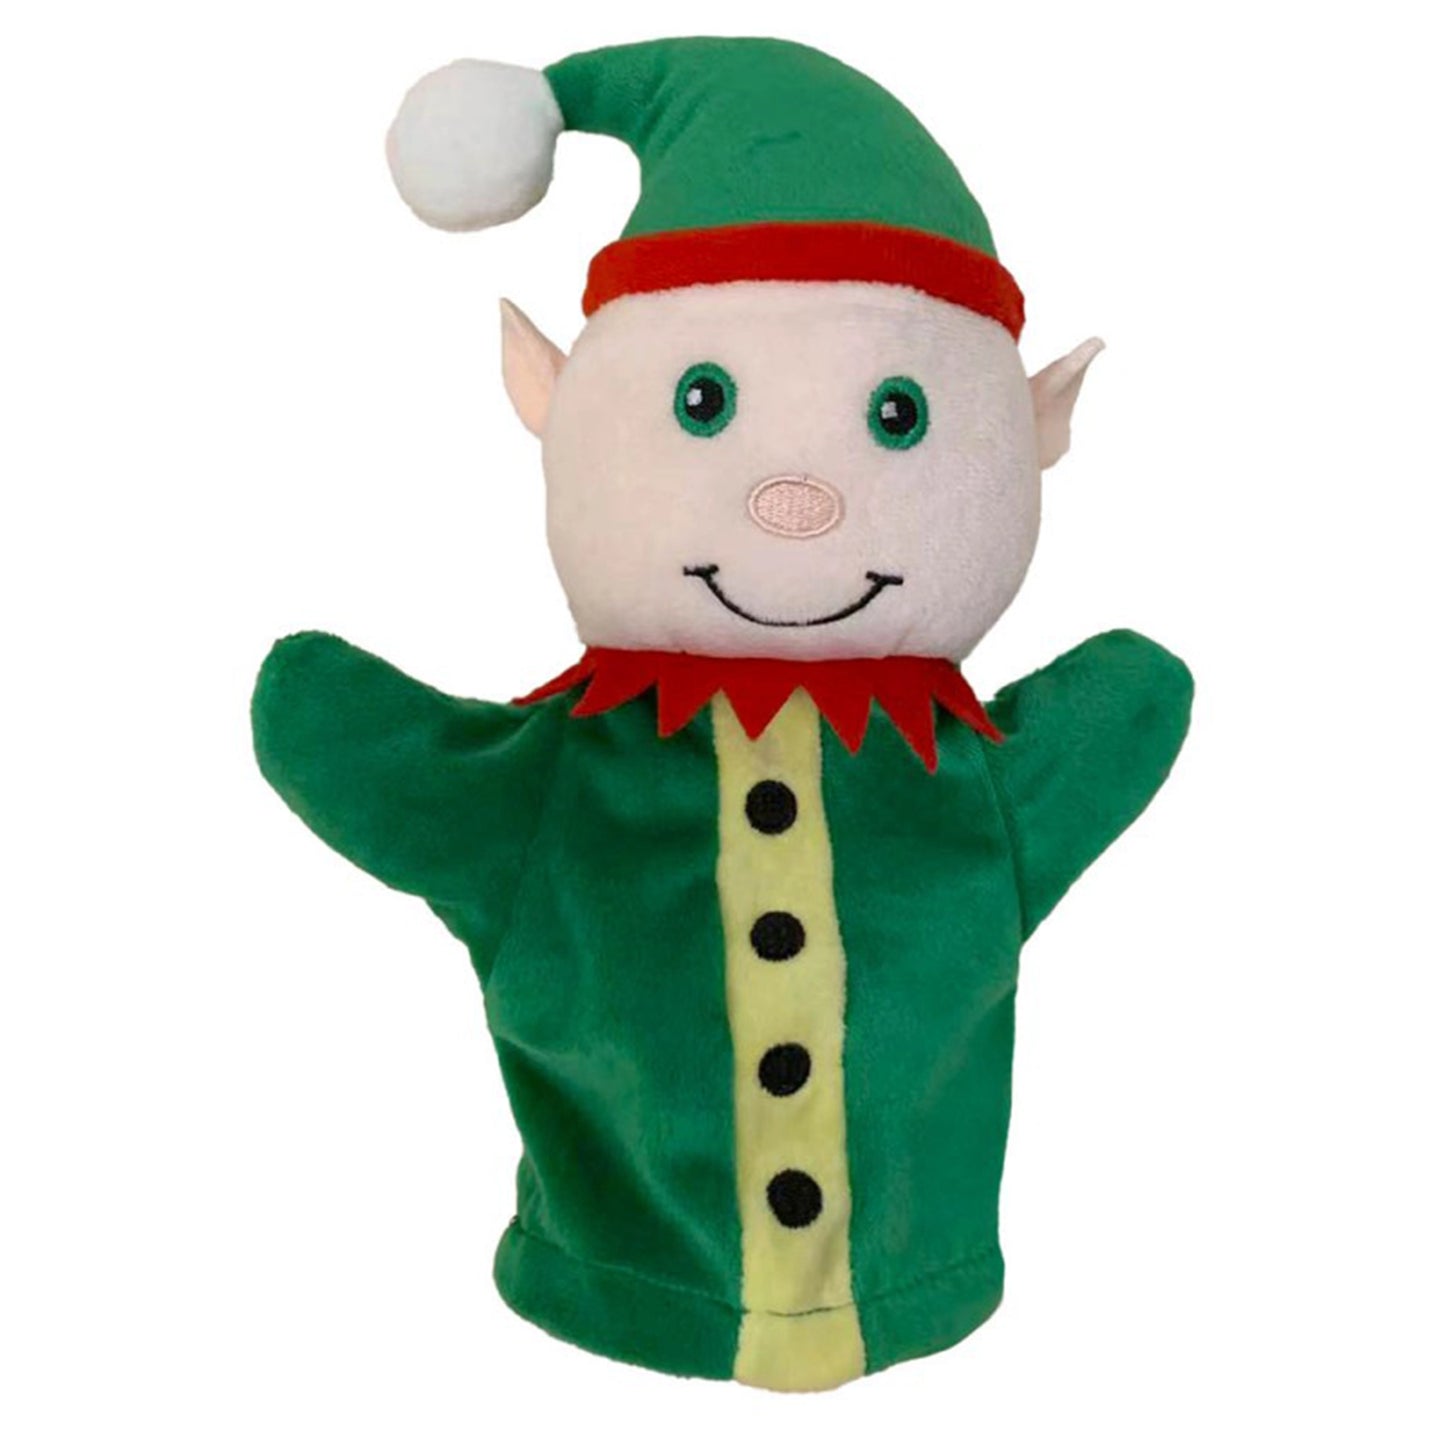 My First Christmas Puppet - Elf - The Puppet Company - The Forgotten Toy Shop